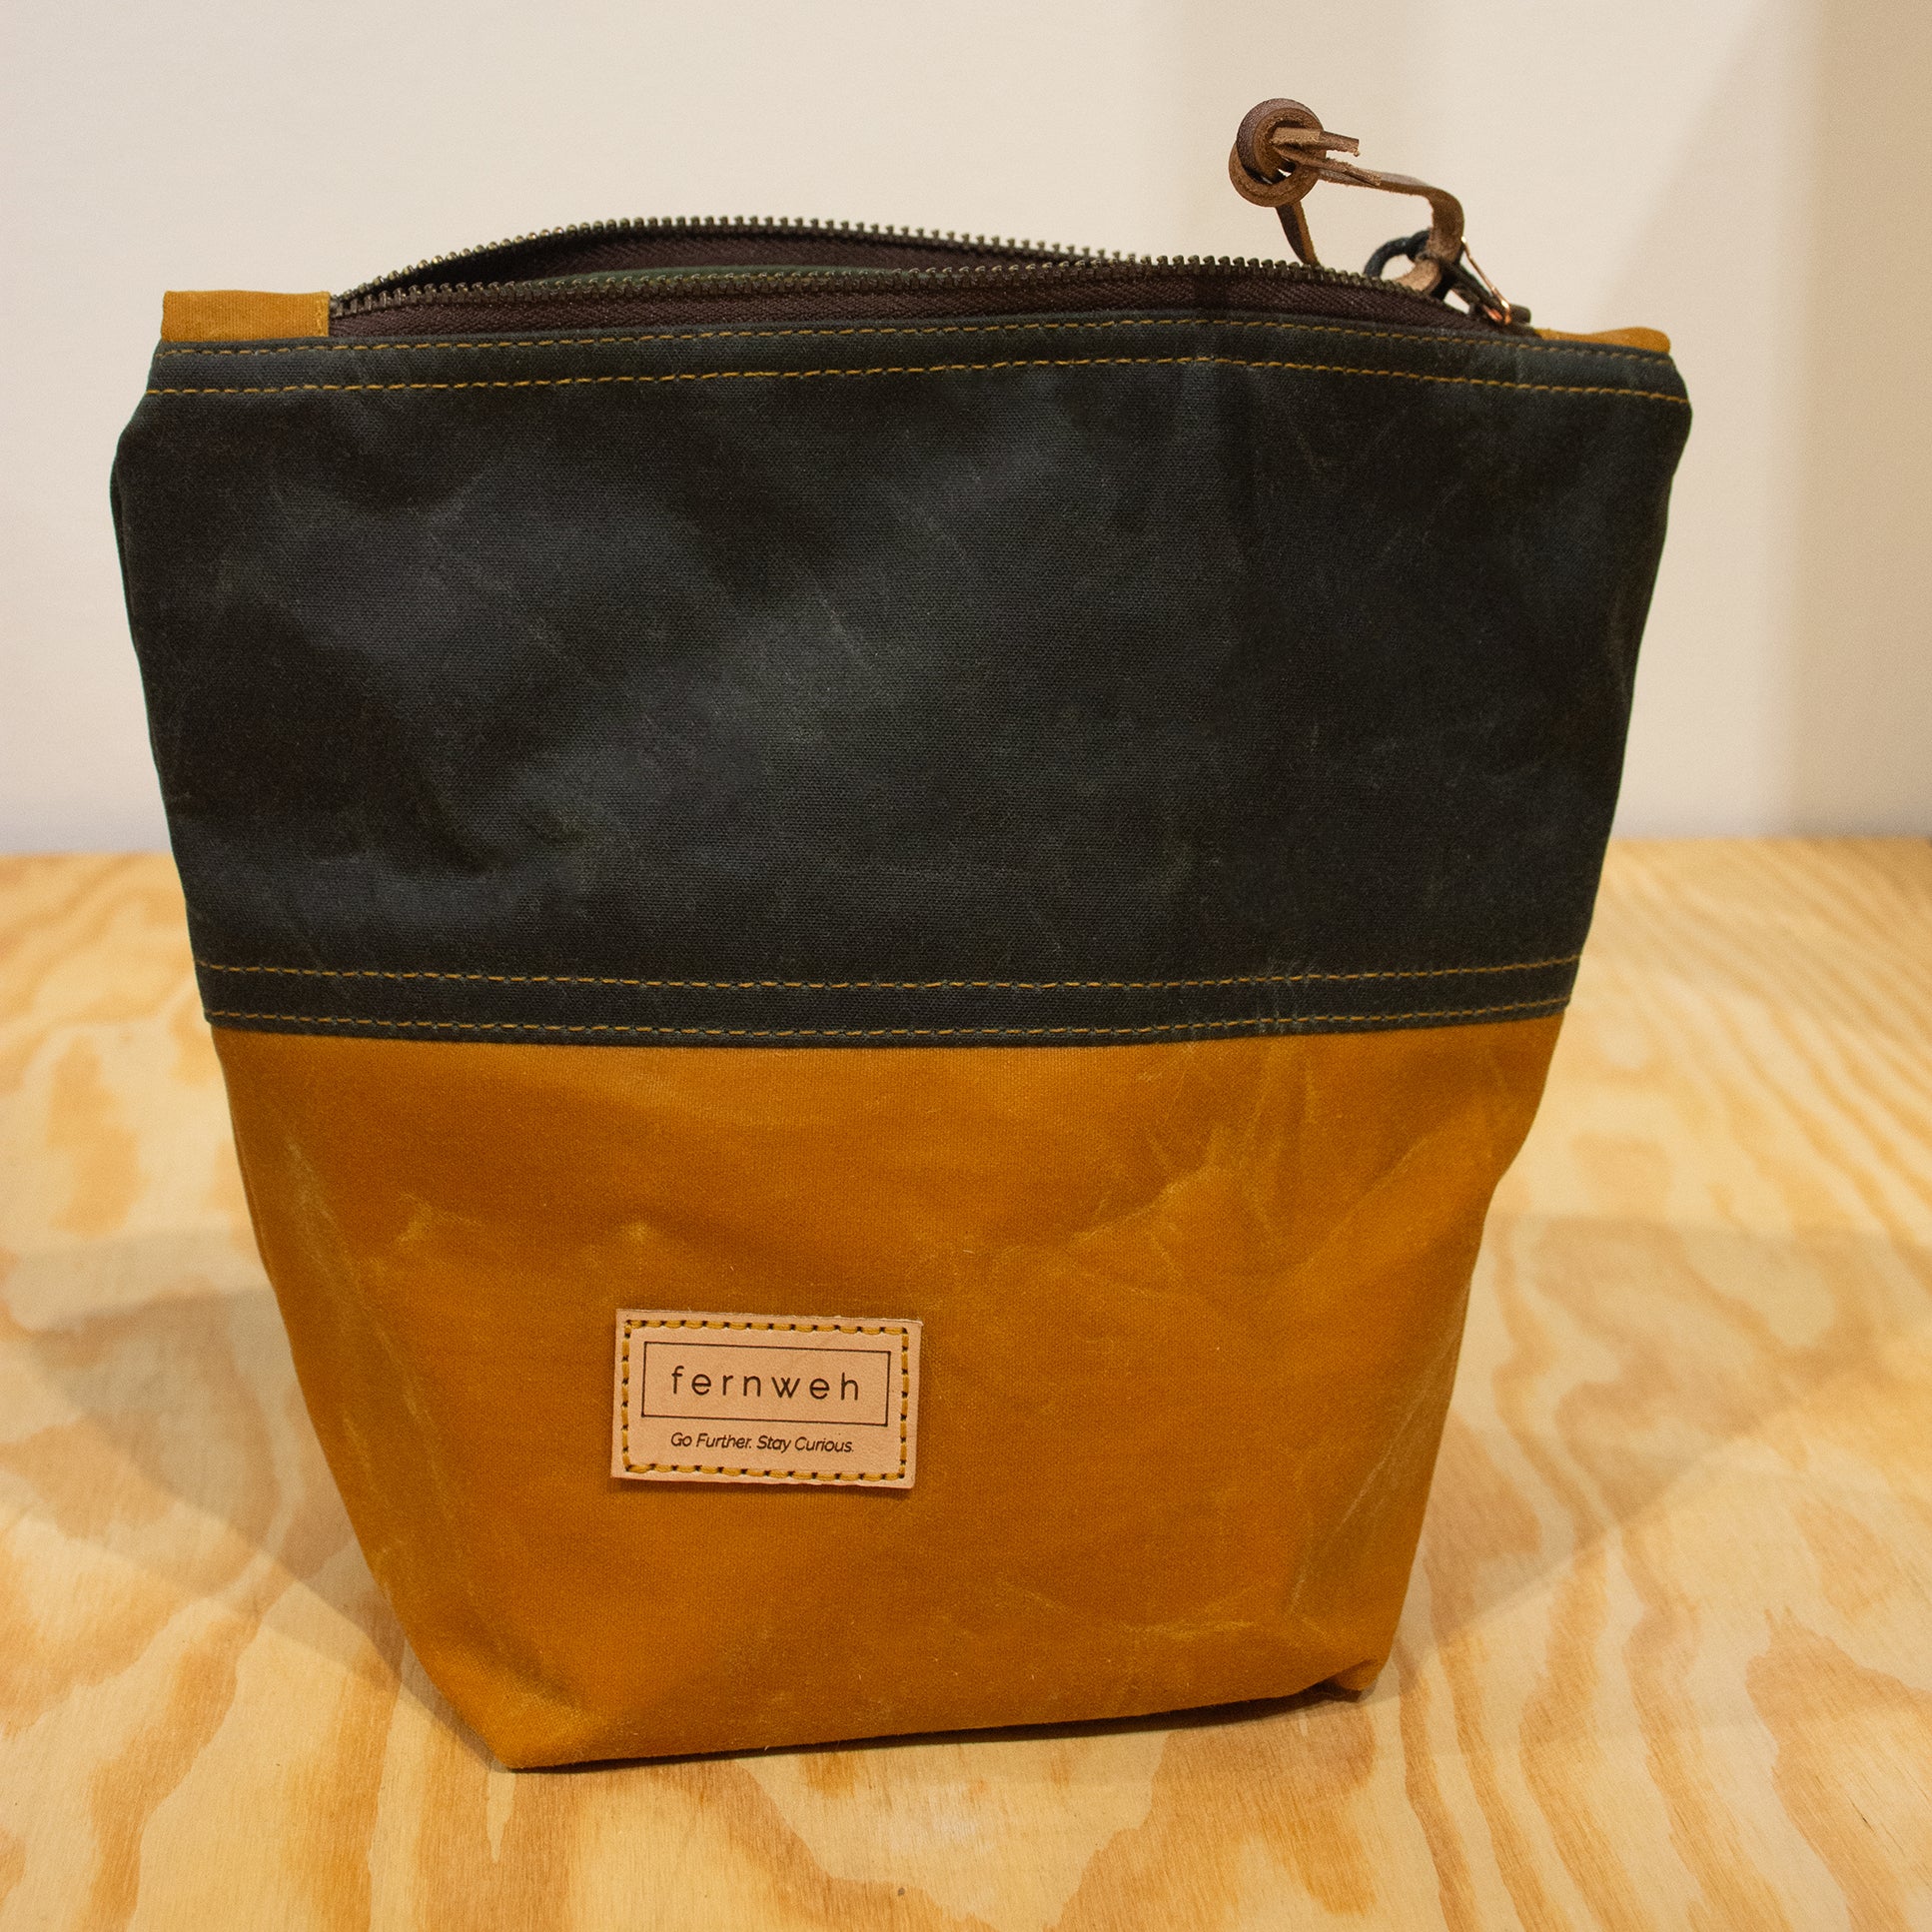 SPEY Waxed Cotton Washbag - Double